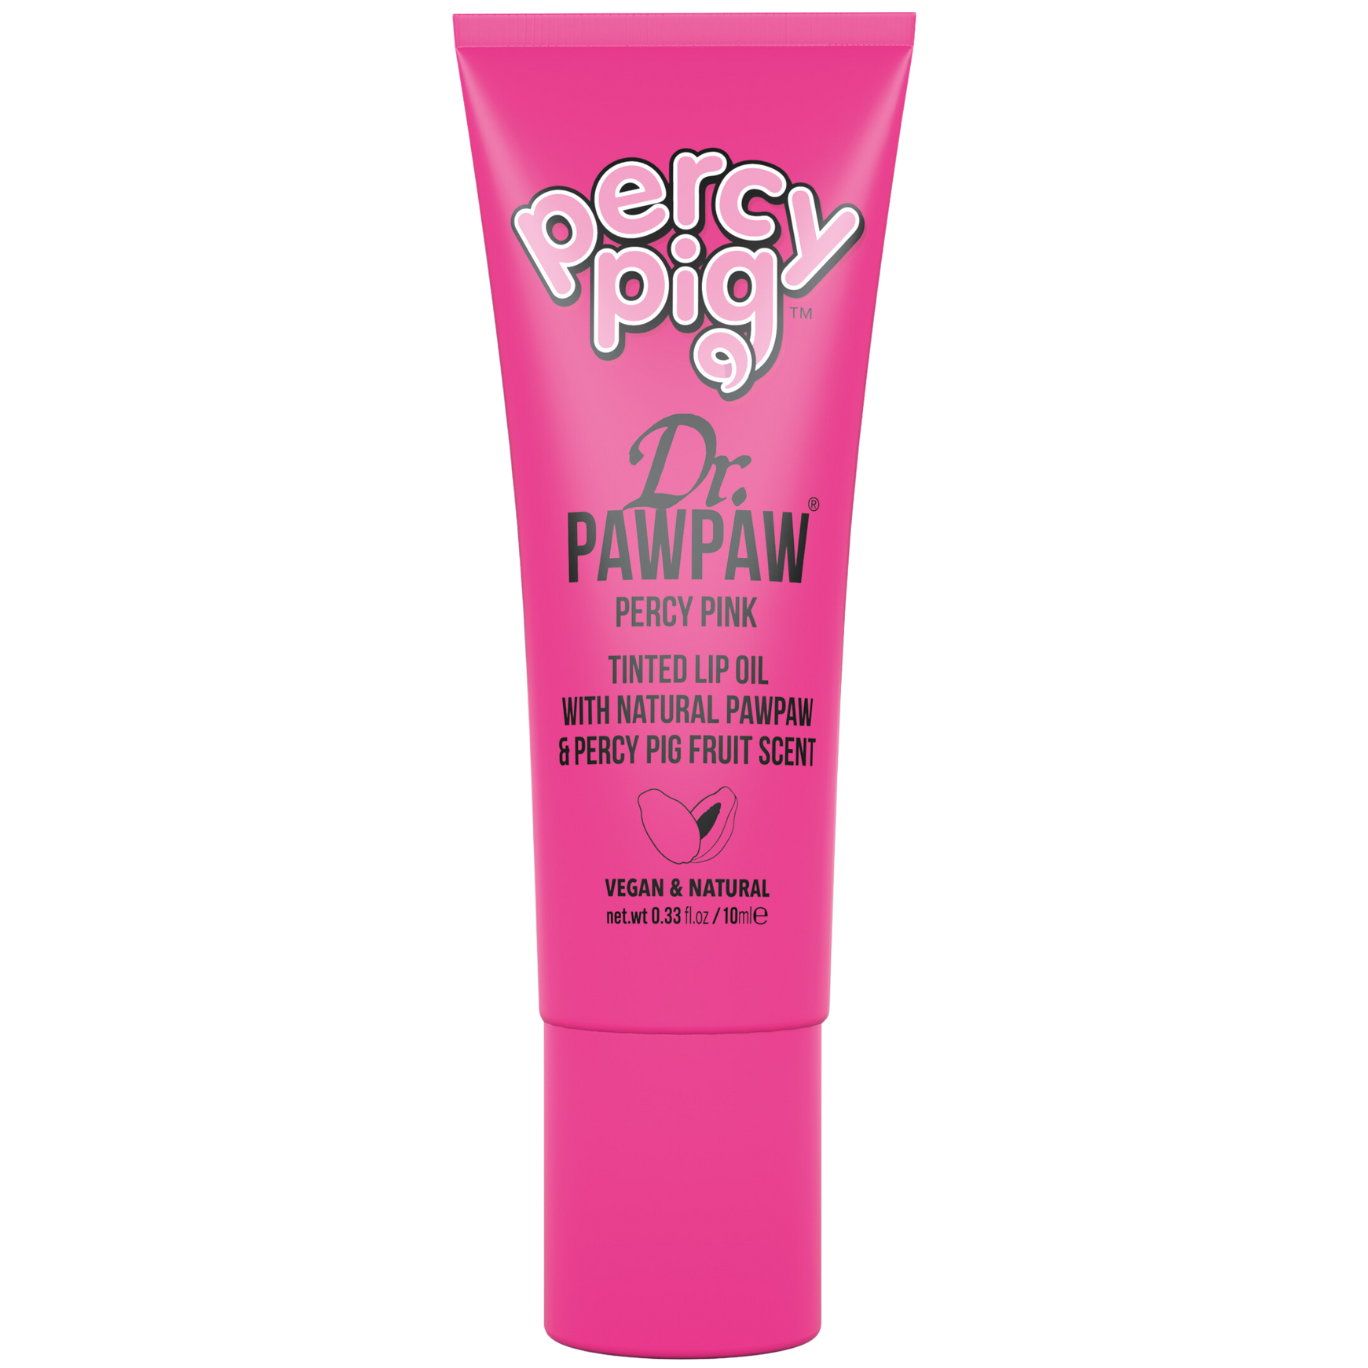 Dr. Paw Paw Percy Pink Tinted Lip Oil